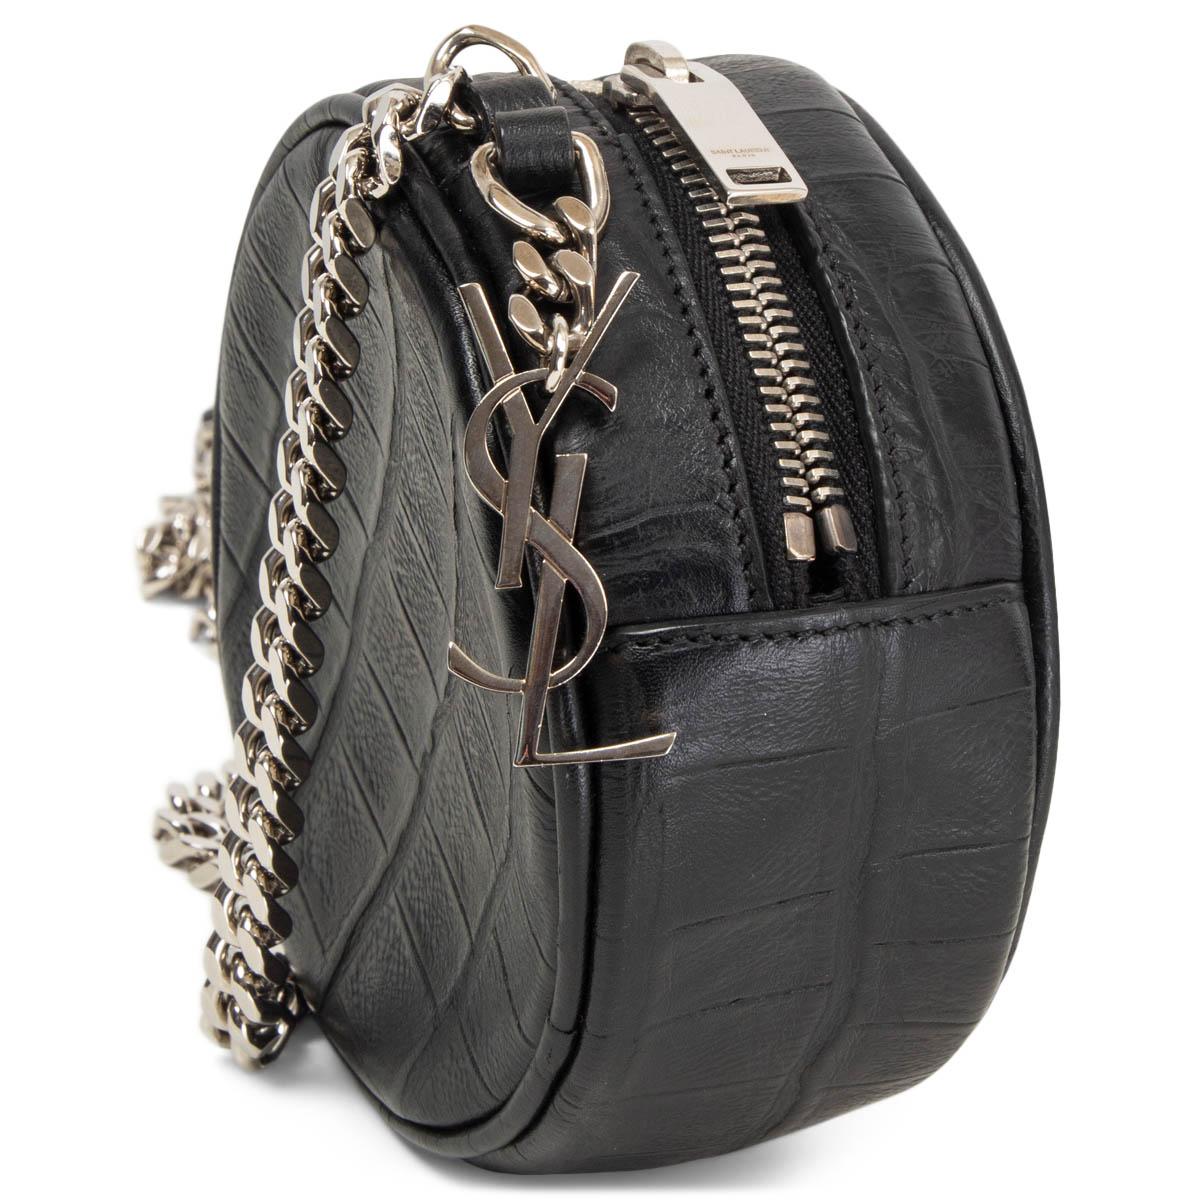 100% authentic Saint Laurent Monogram Bubble Small shoulder Bag in black croc embossed leather featuring silver-tone YSL logo charm and chain link shoulder-strap. Lined in black canvas. Has been carried once or twice and is in excellent condition.